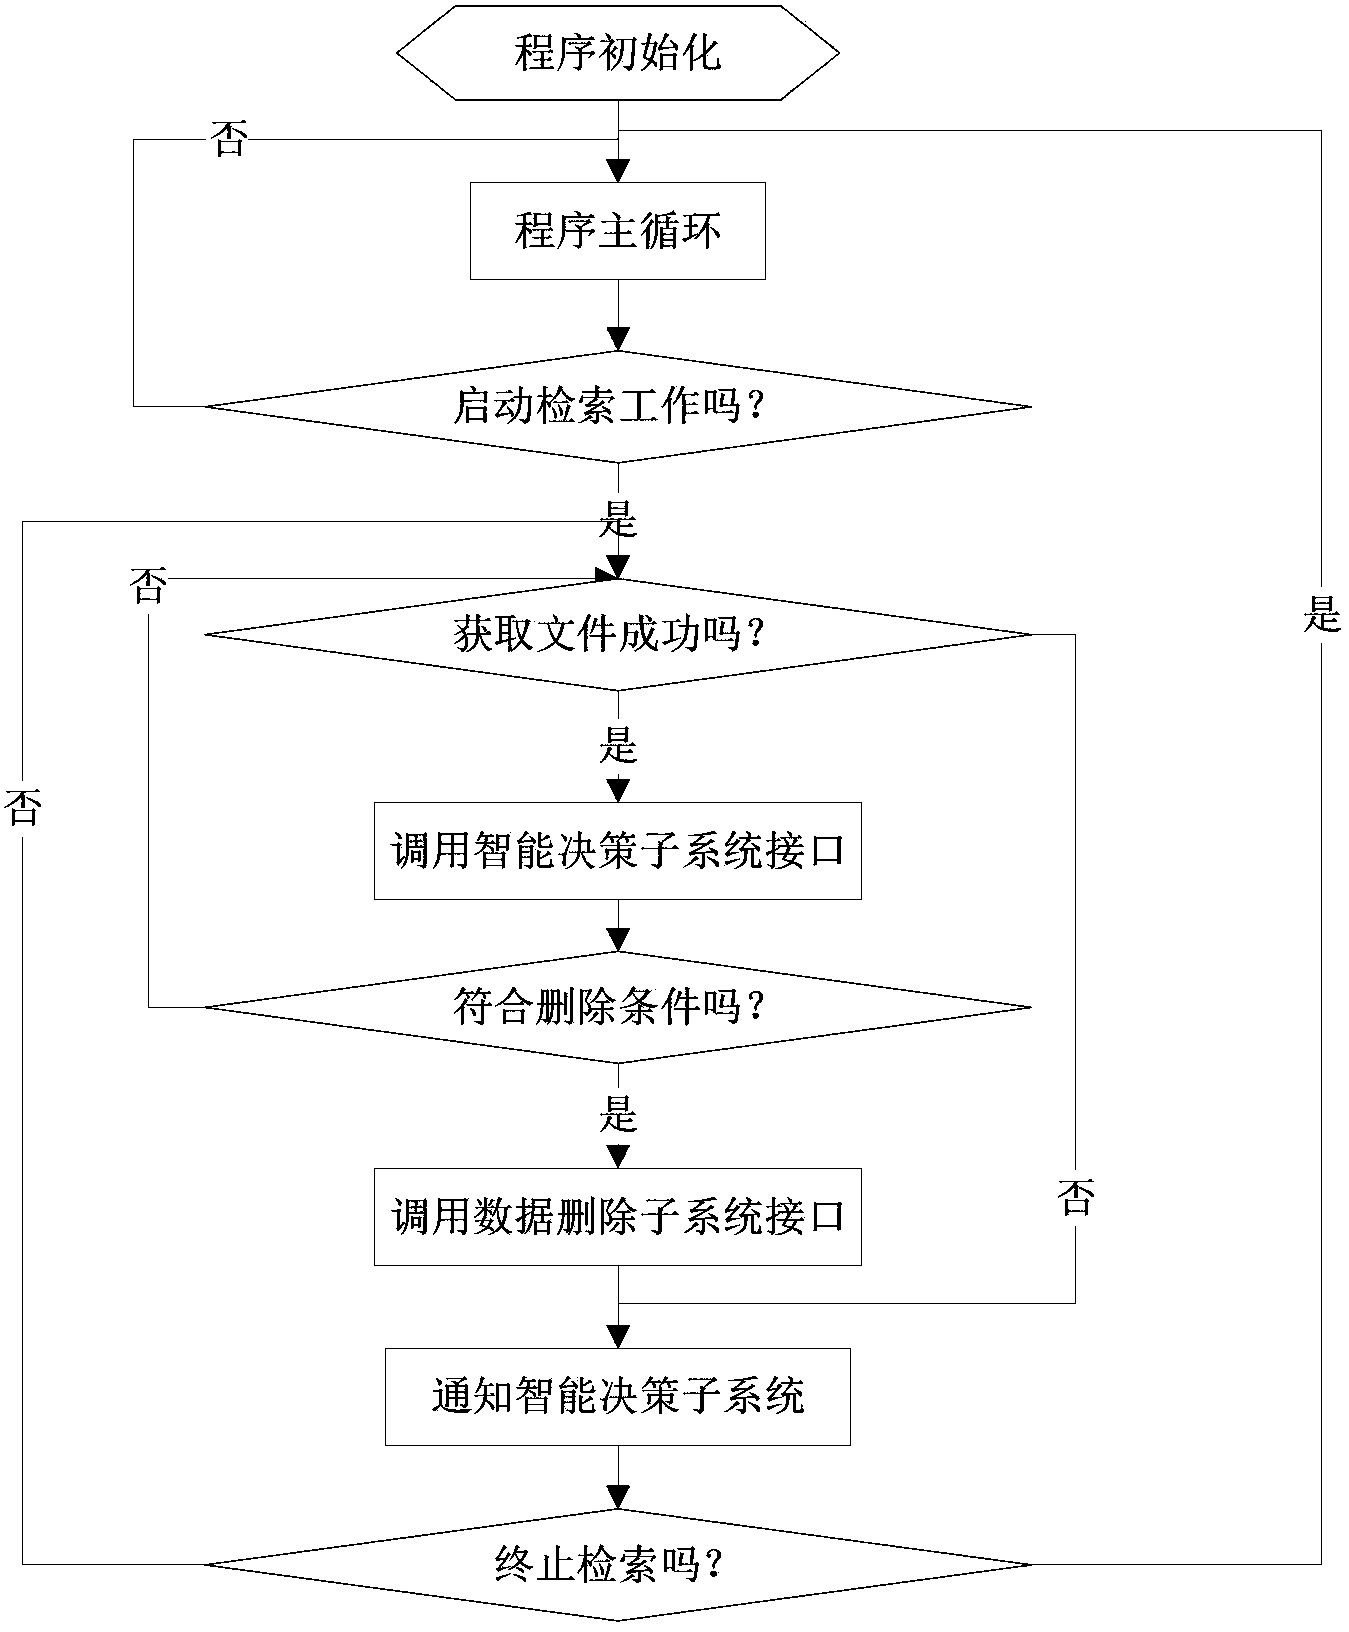 Method and system for data cleaning suitable for mass storage